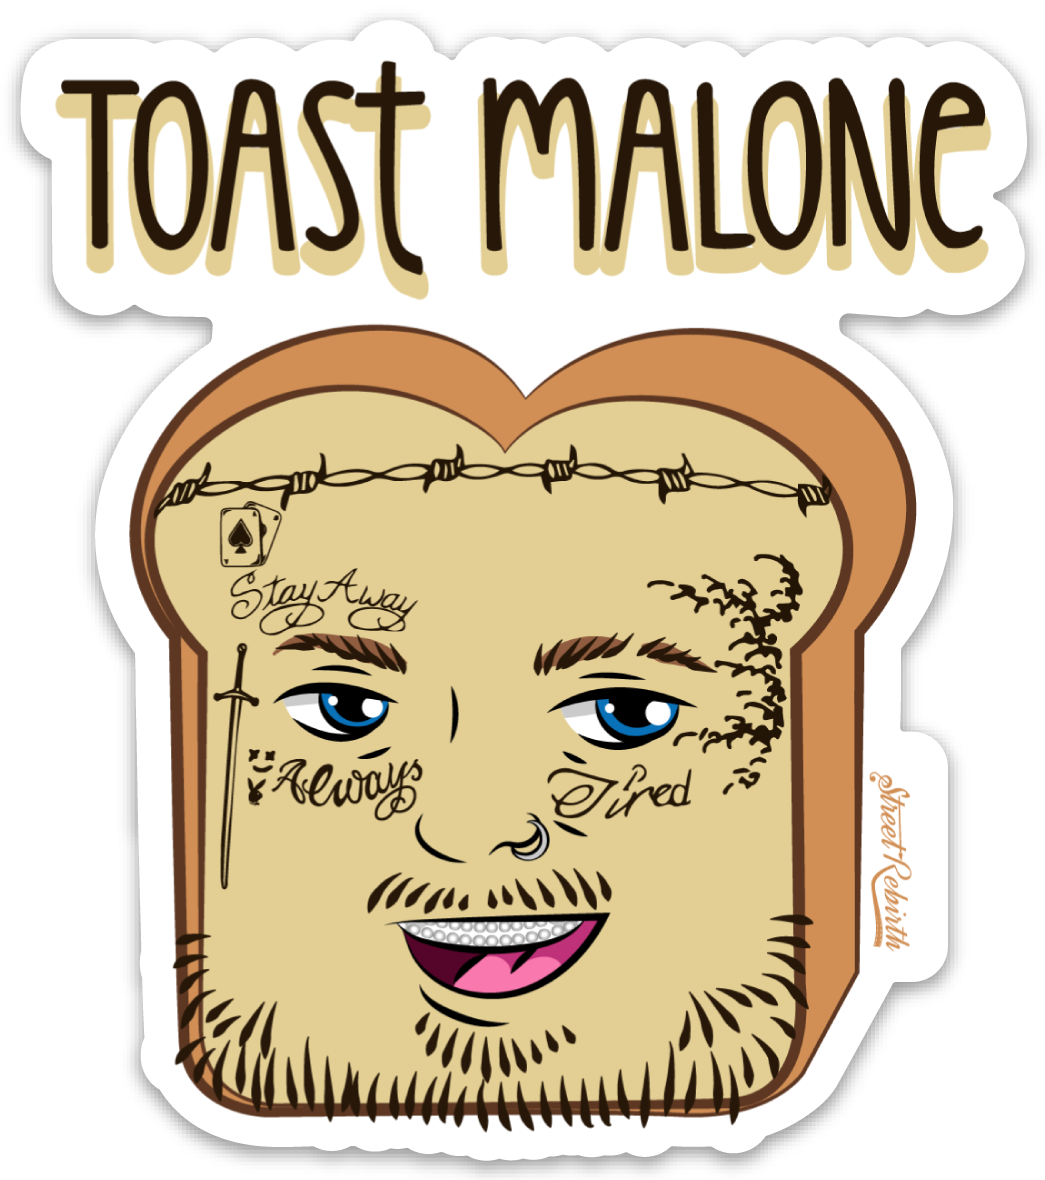 TOAST MALONE PUN STICKER – ONE 4 INCH WATER PROOF VINYL STICKER – FOR HYDRO FLASK, SKATEBOARD, LAPTOP, PLANNER, CAR, COLLECTING, GIFTING